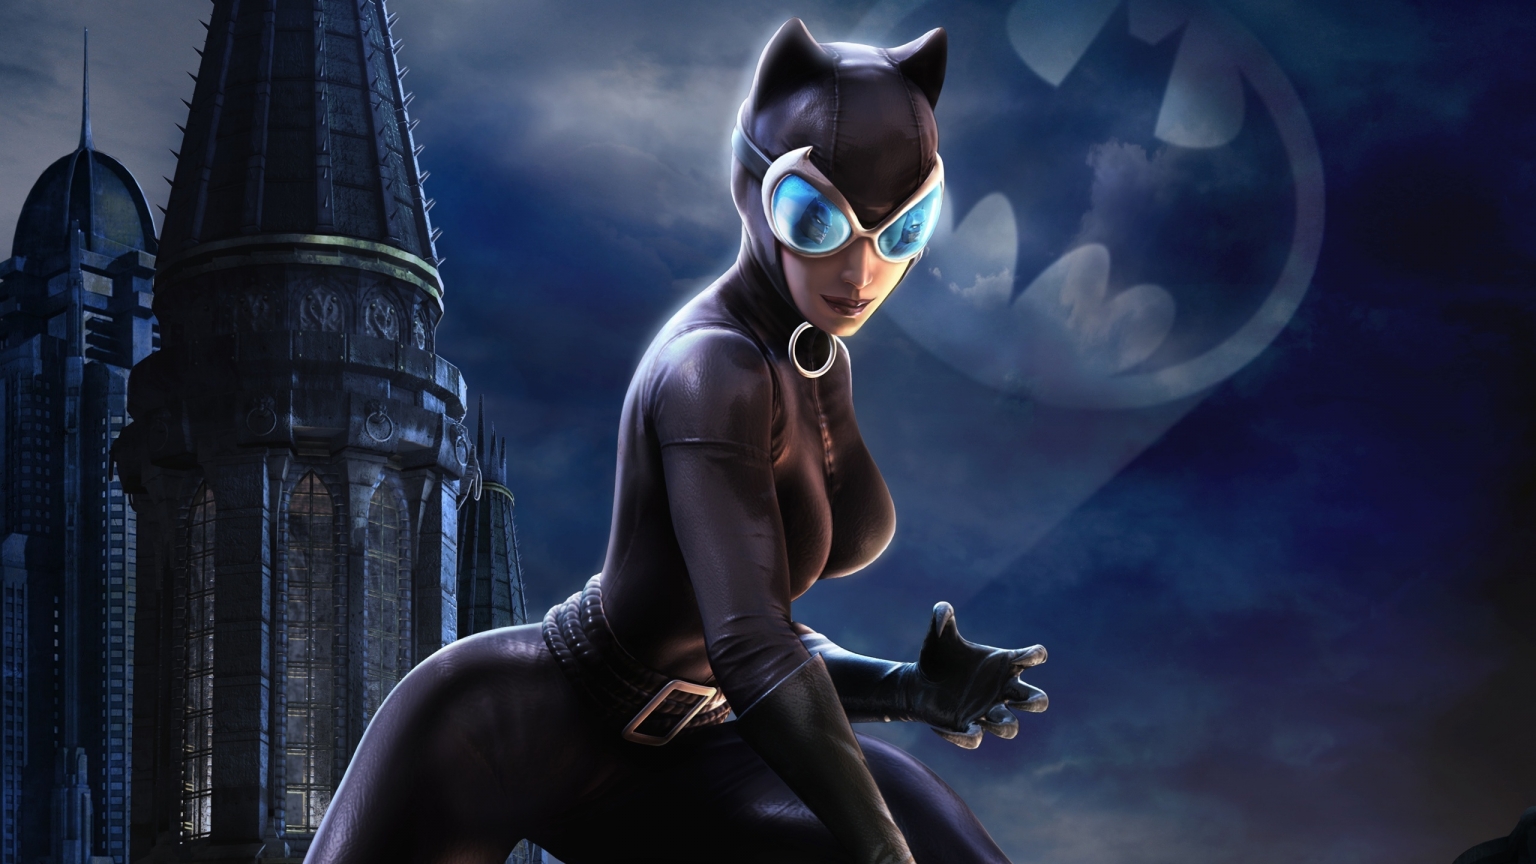 Catwoman DC Universe for 1536 x 864 HDTV resolution